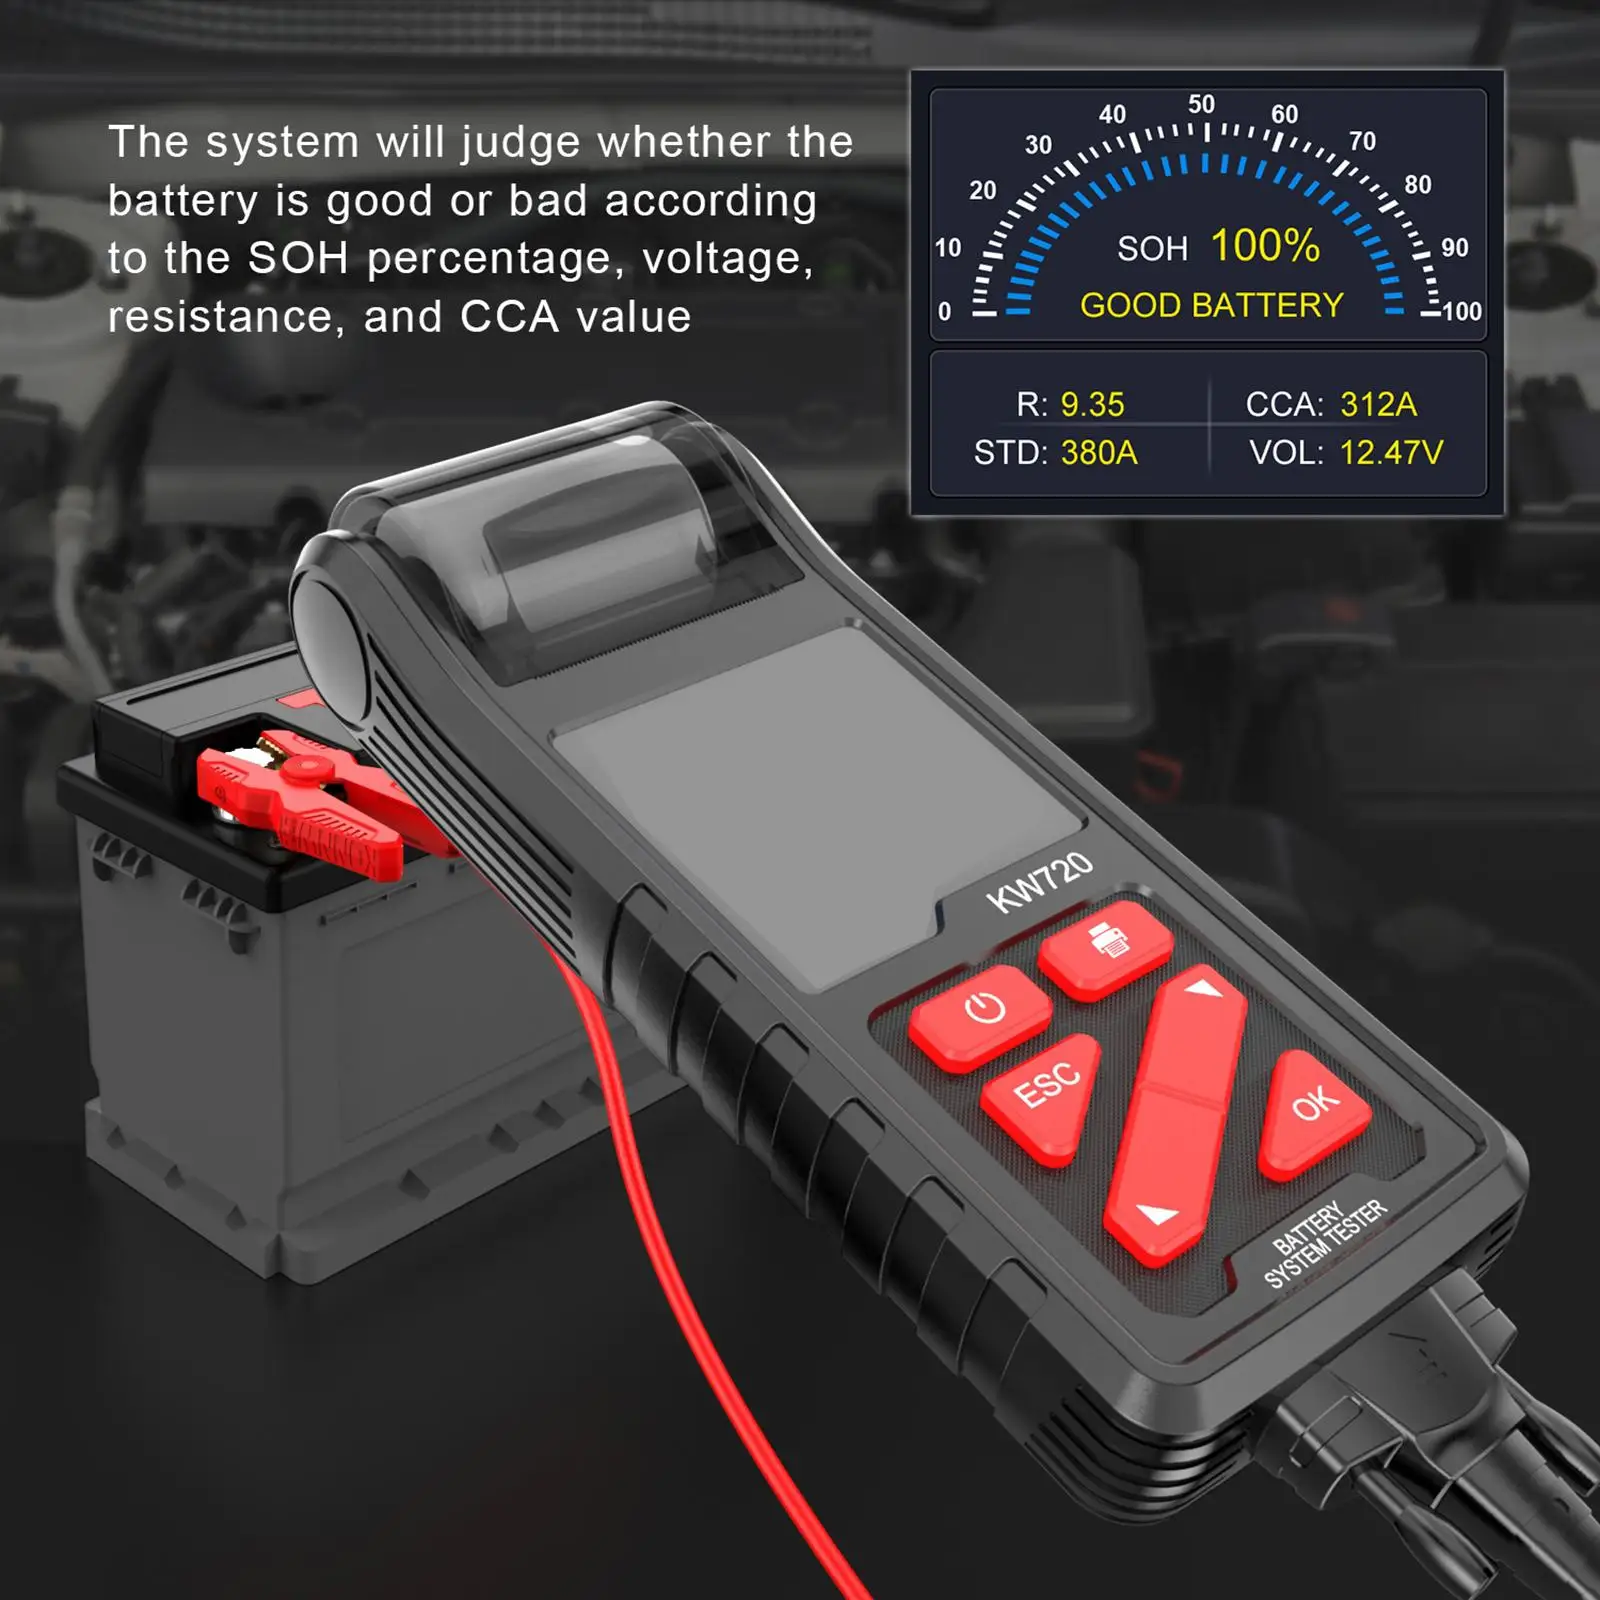 KW720 Car Battery Tester with Printer 6V 12V 24V Charging Test Tool Auto Battery Analyzer for Cars Marine Boats Truck